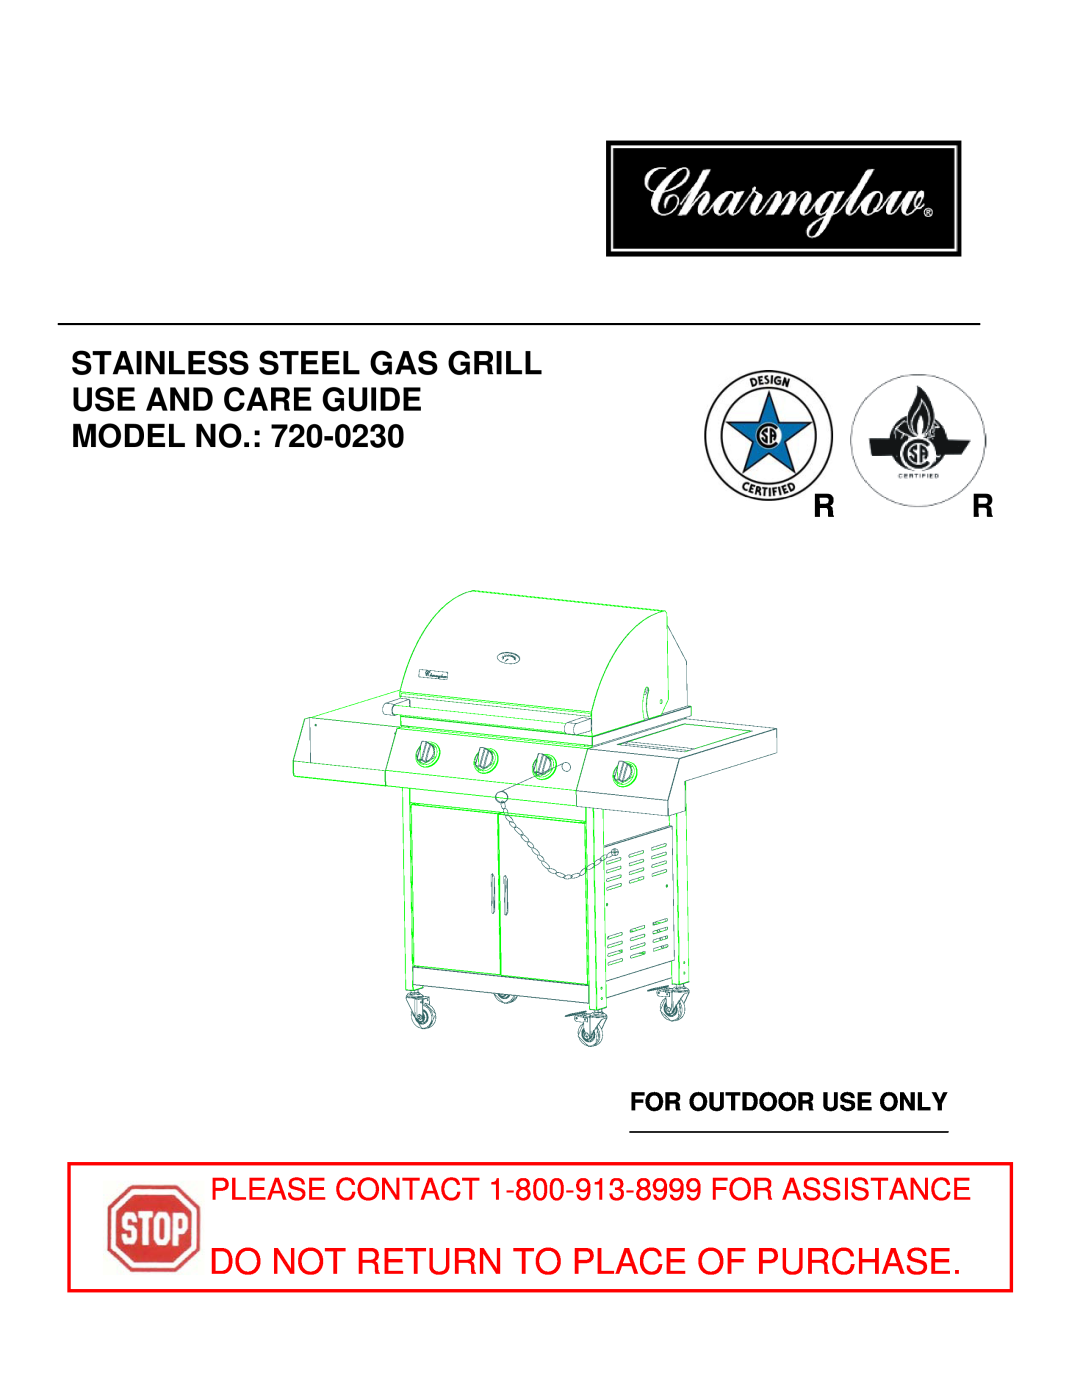 Nexgrill 720-0230 manual Do Not Return To Place Of Purchase, Stainless Steel Gas Grill Us`E And Care Guide Model No 